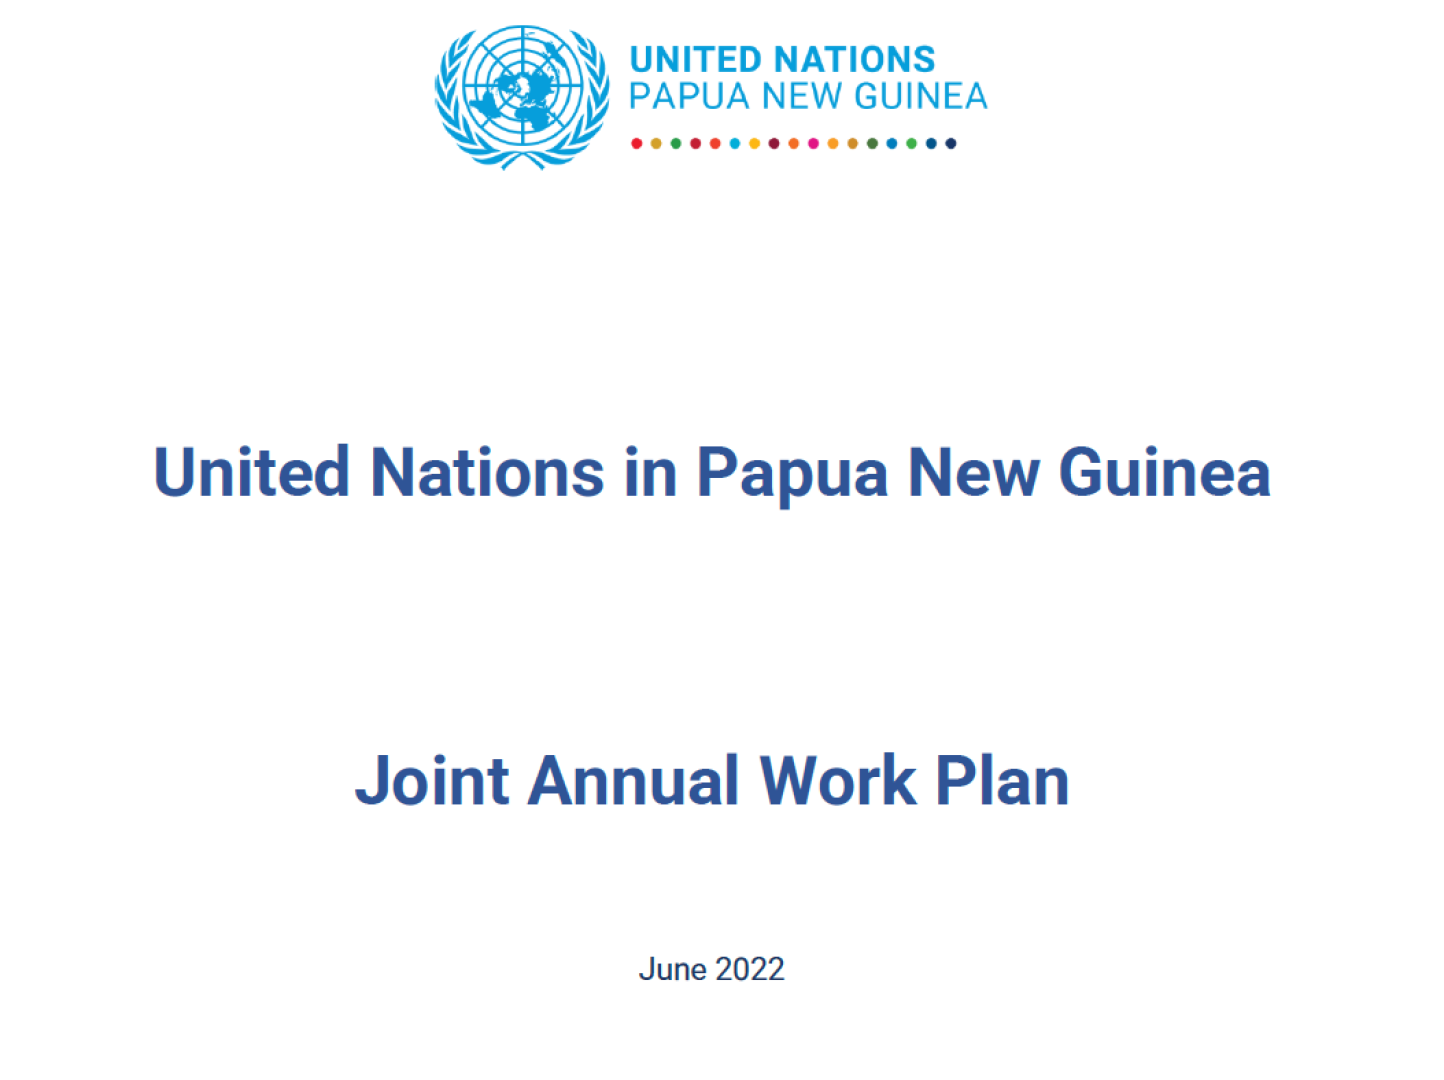 United Nations in Papua New Guinea Joint Annual Work Plan 2022